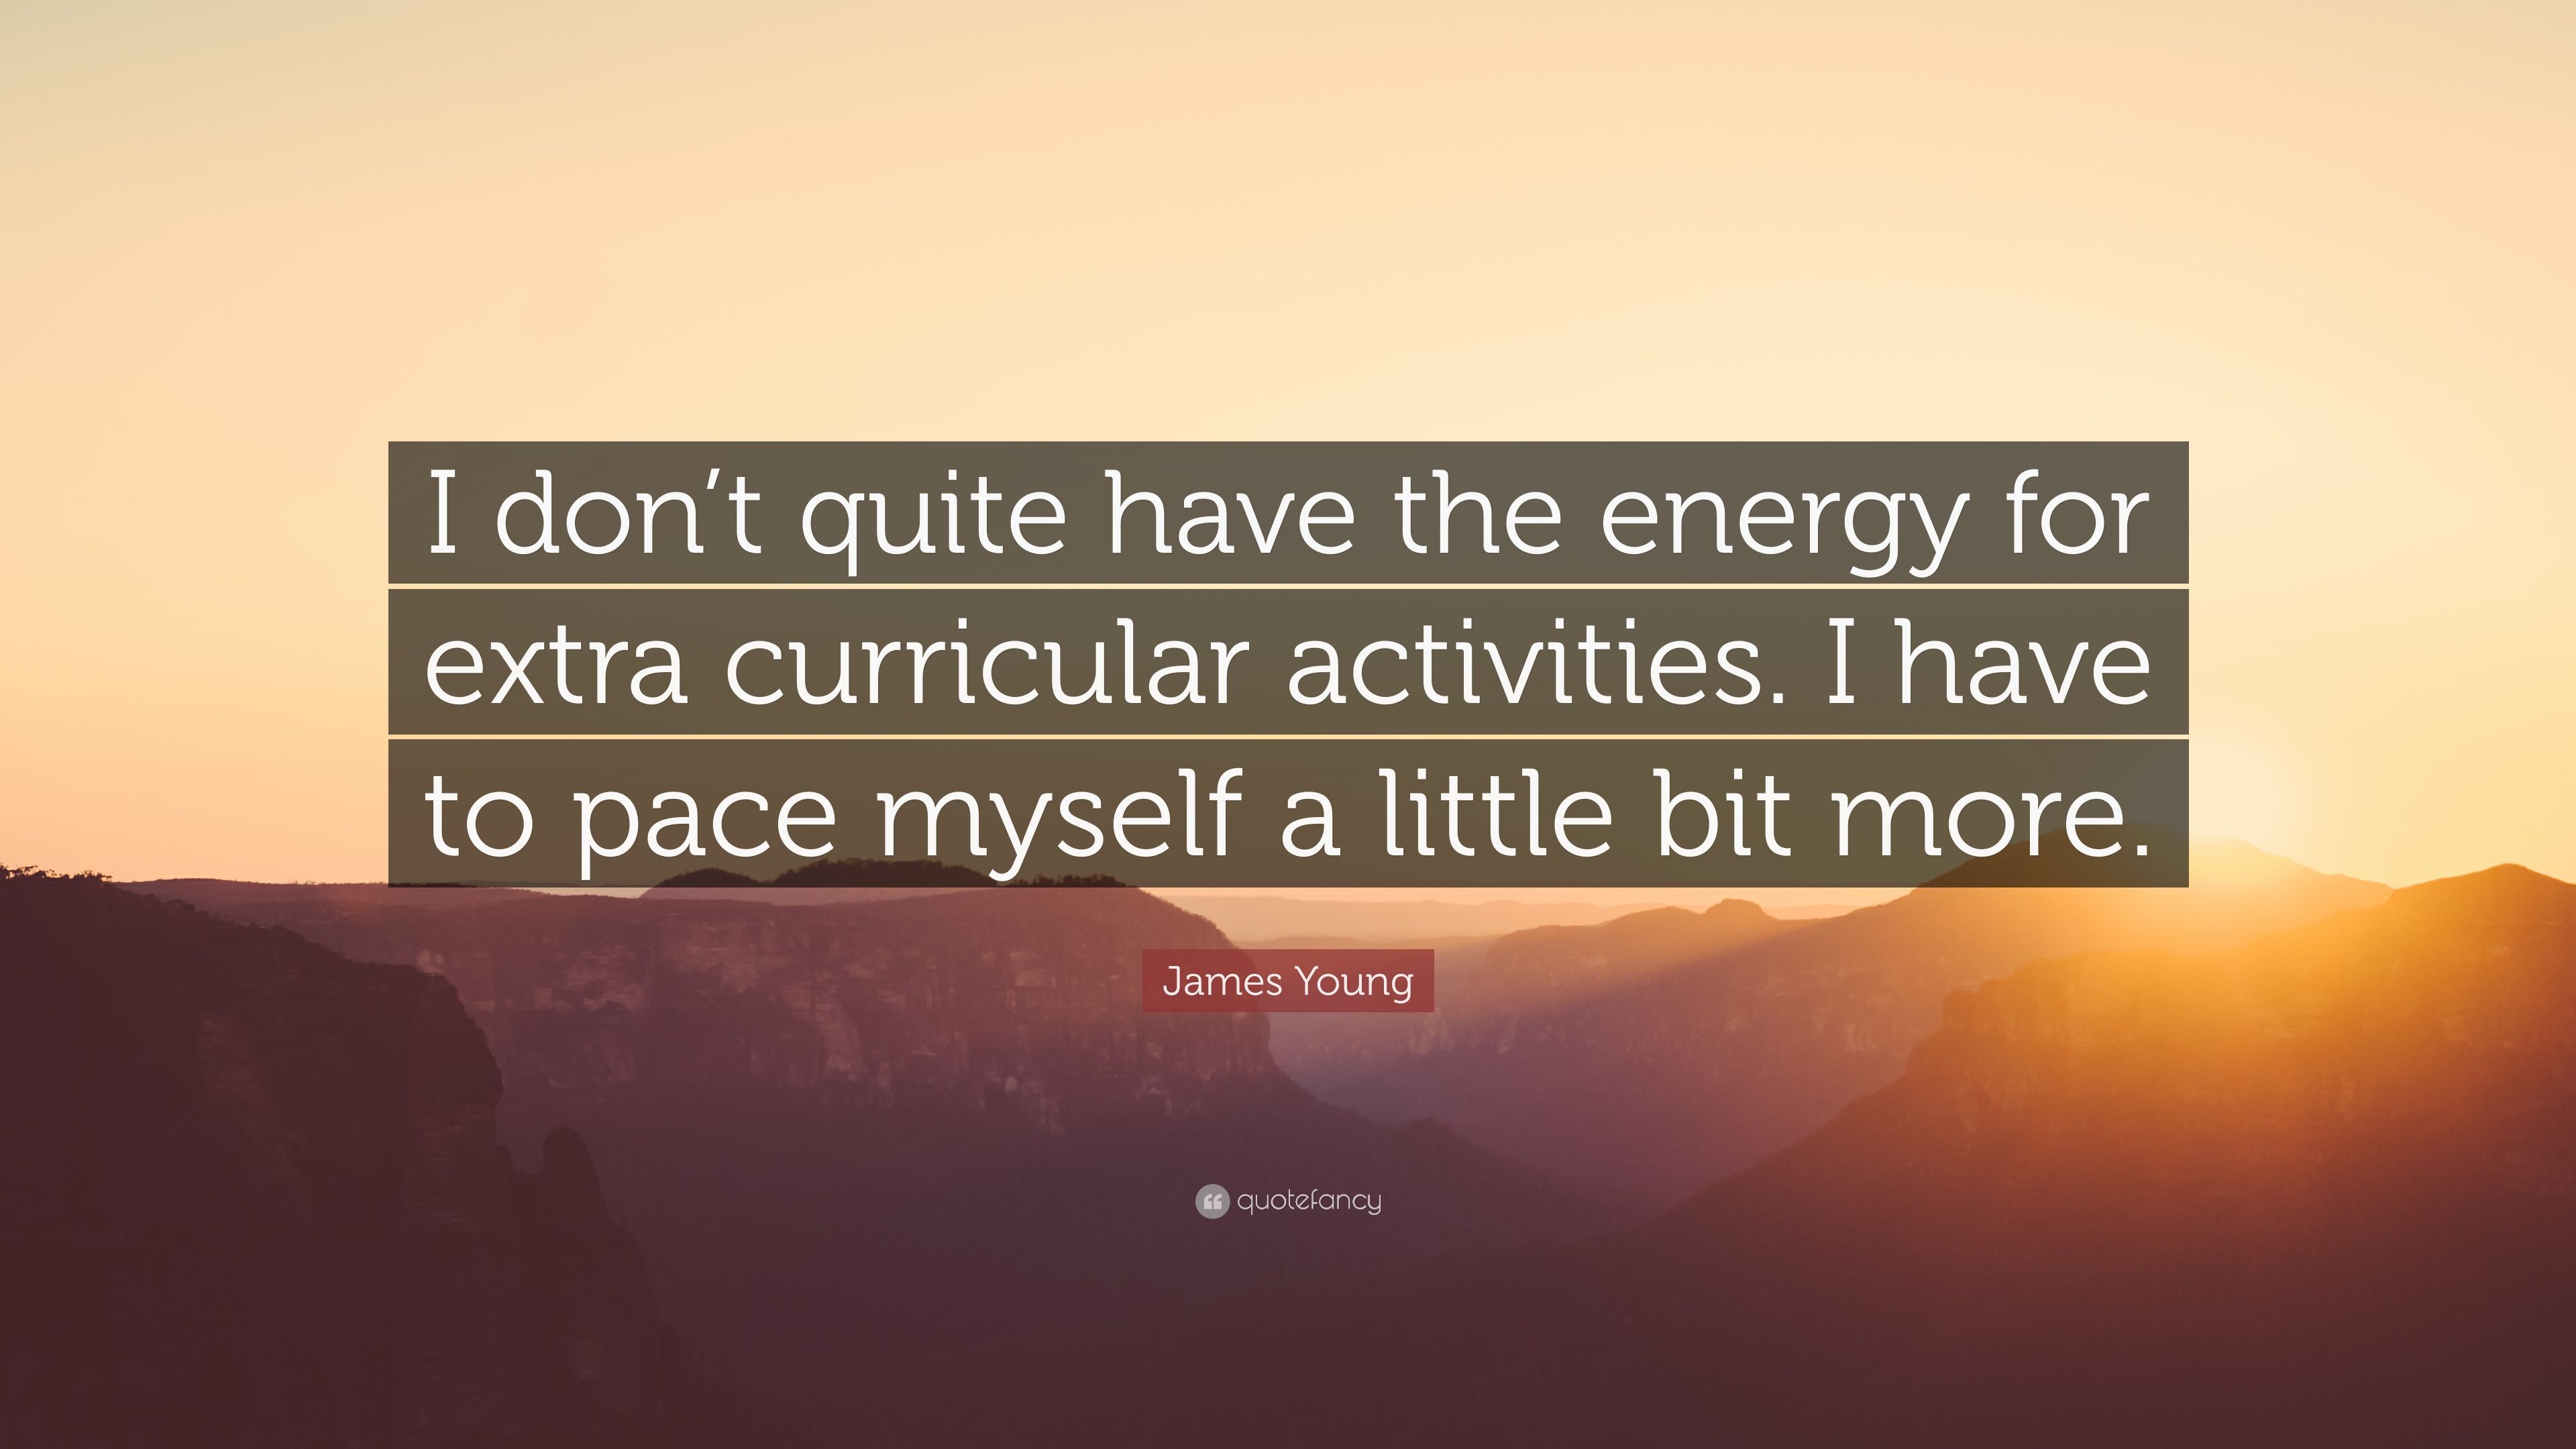 James Young Quote: “I don't quite have the energy for extra